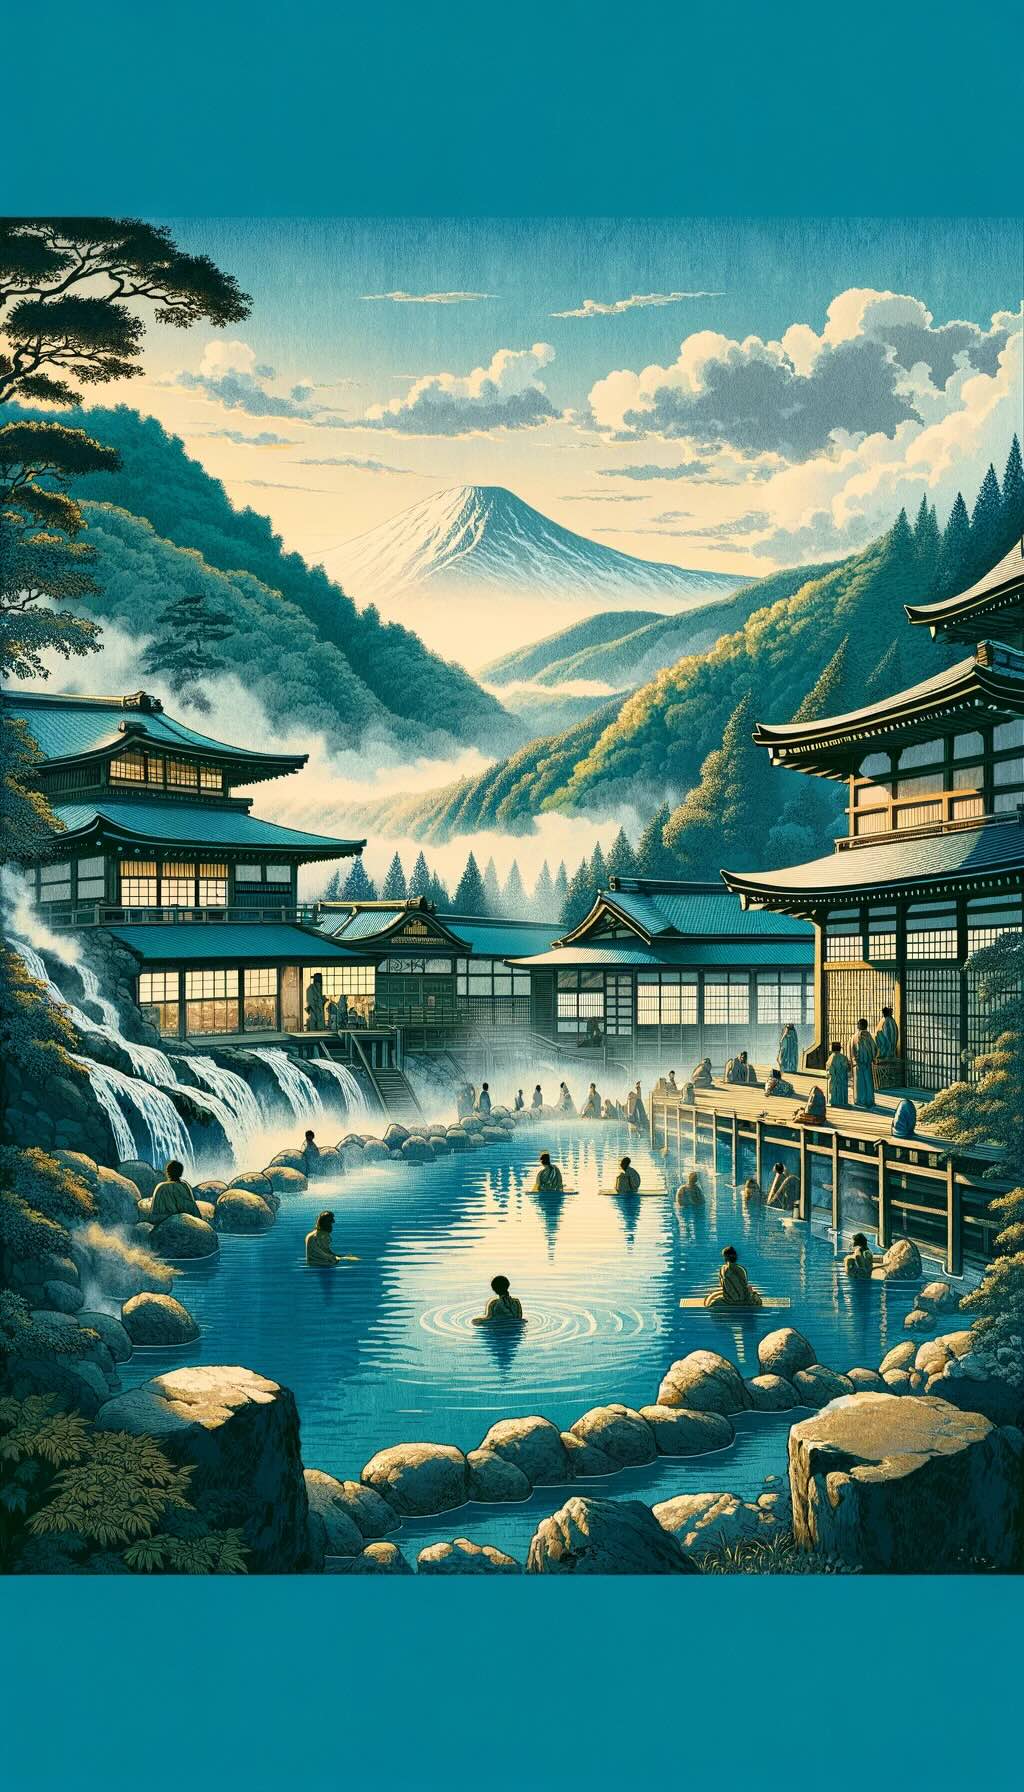 Serene and tranquil essence of the Onsen experience in Hitoyoshi depicts a peaceful and picturesque onsen setting, reflecting the unique charm and cultural significance of these natural hot springs in Japan